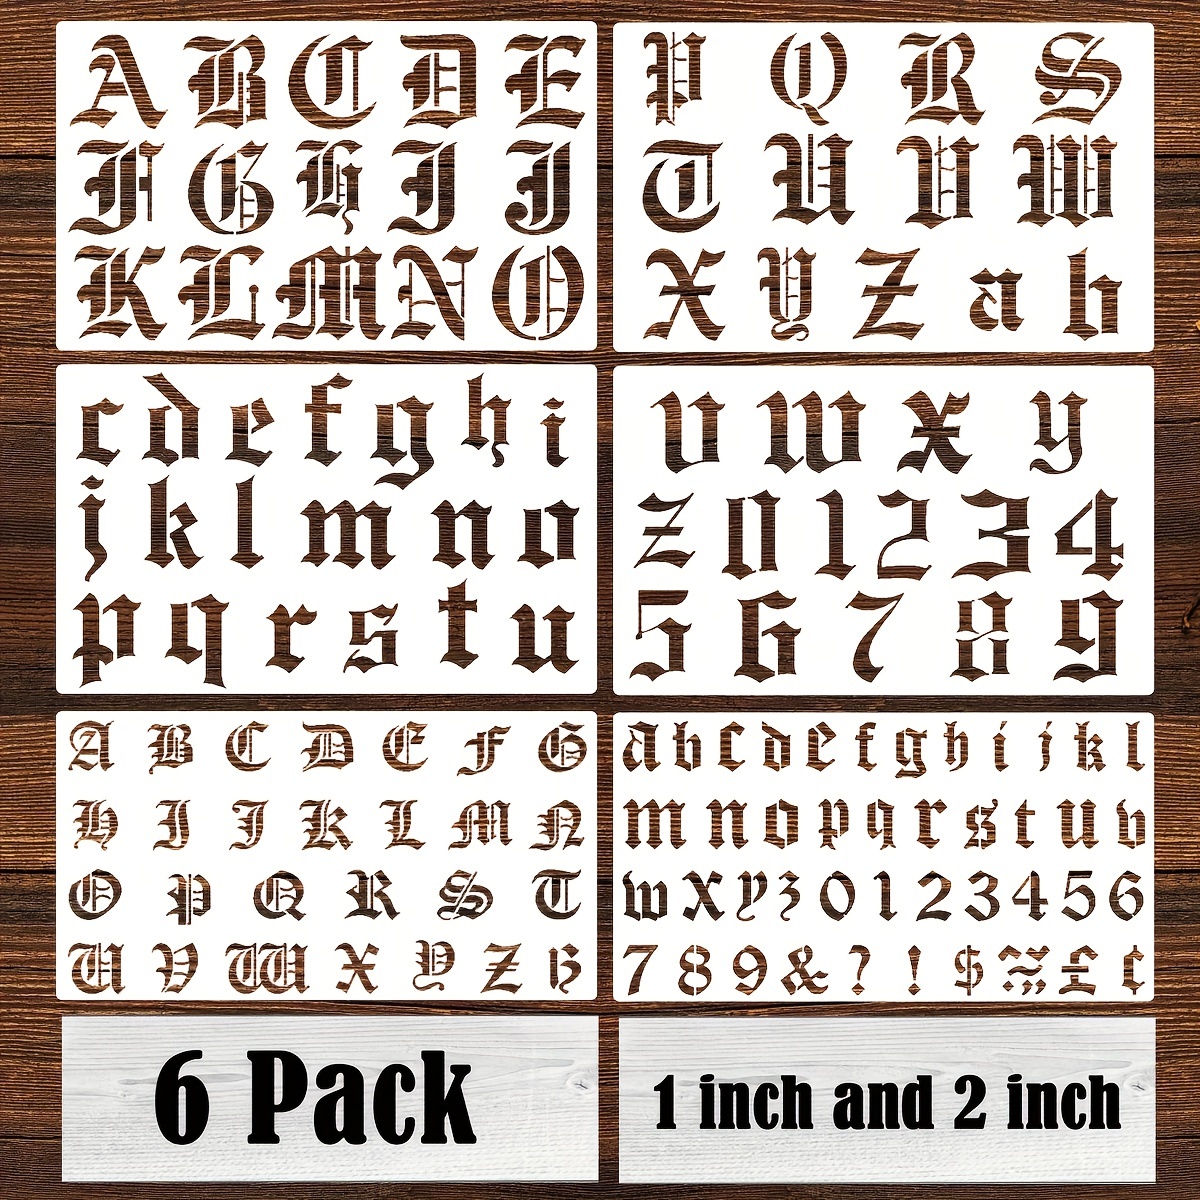 8Pc Old English Calligraphy Stencils - Gothic Font, DIY Crafts & Journal  744759223531